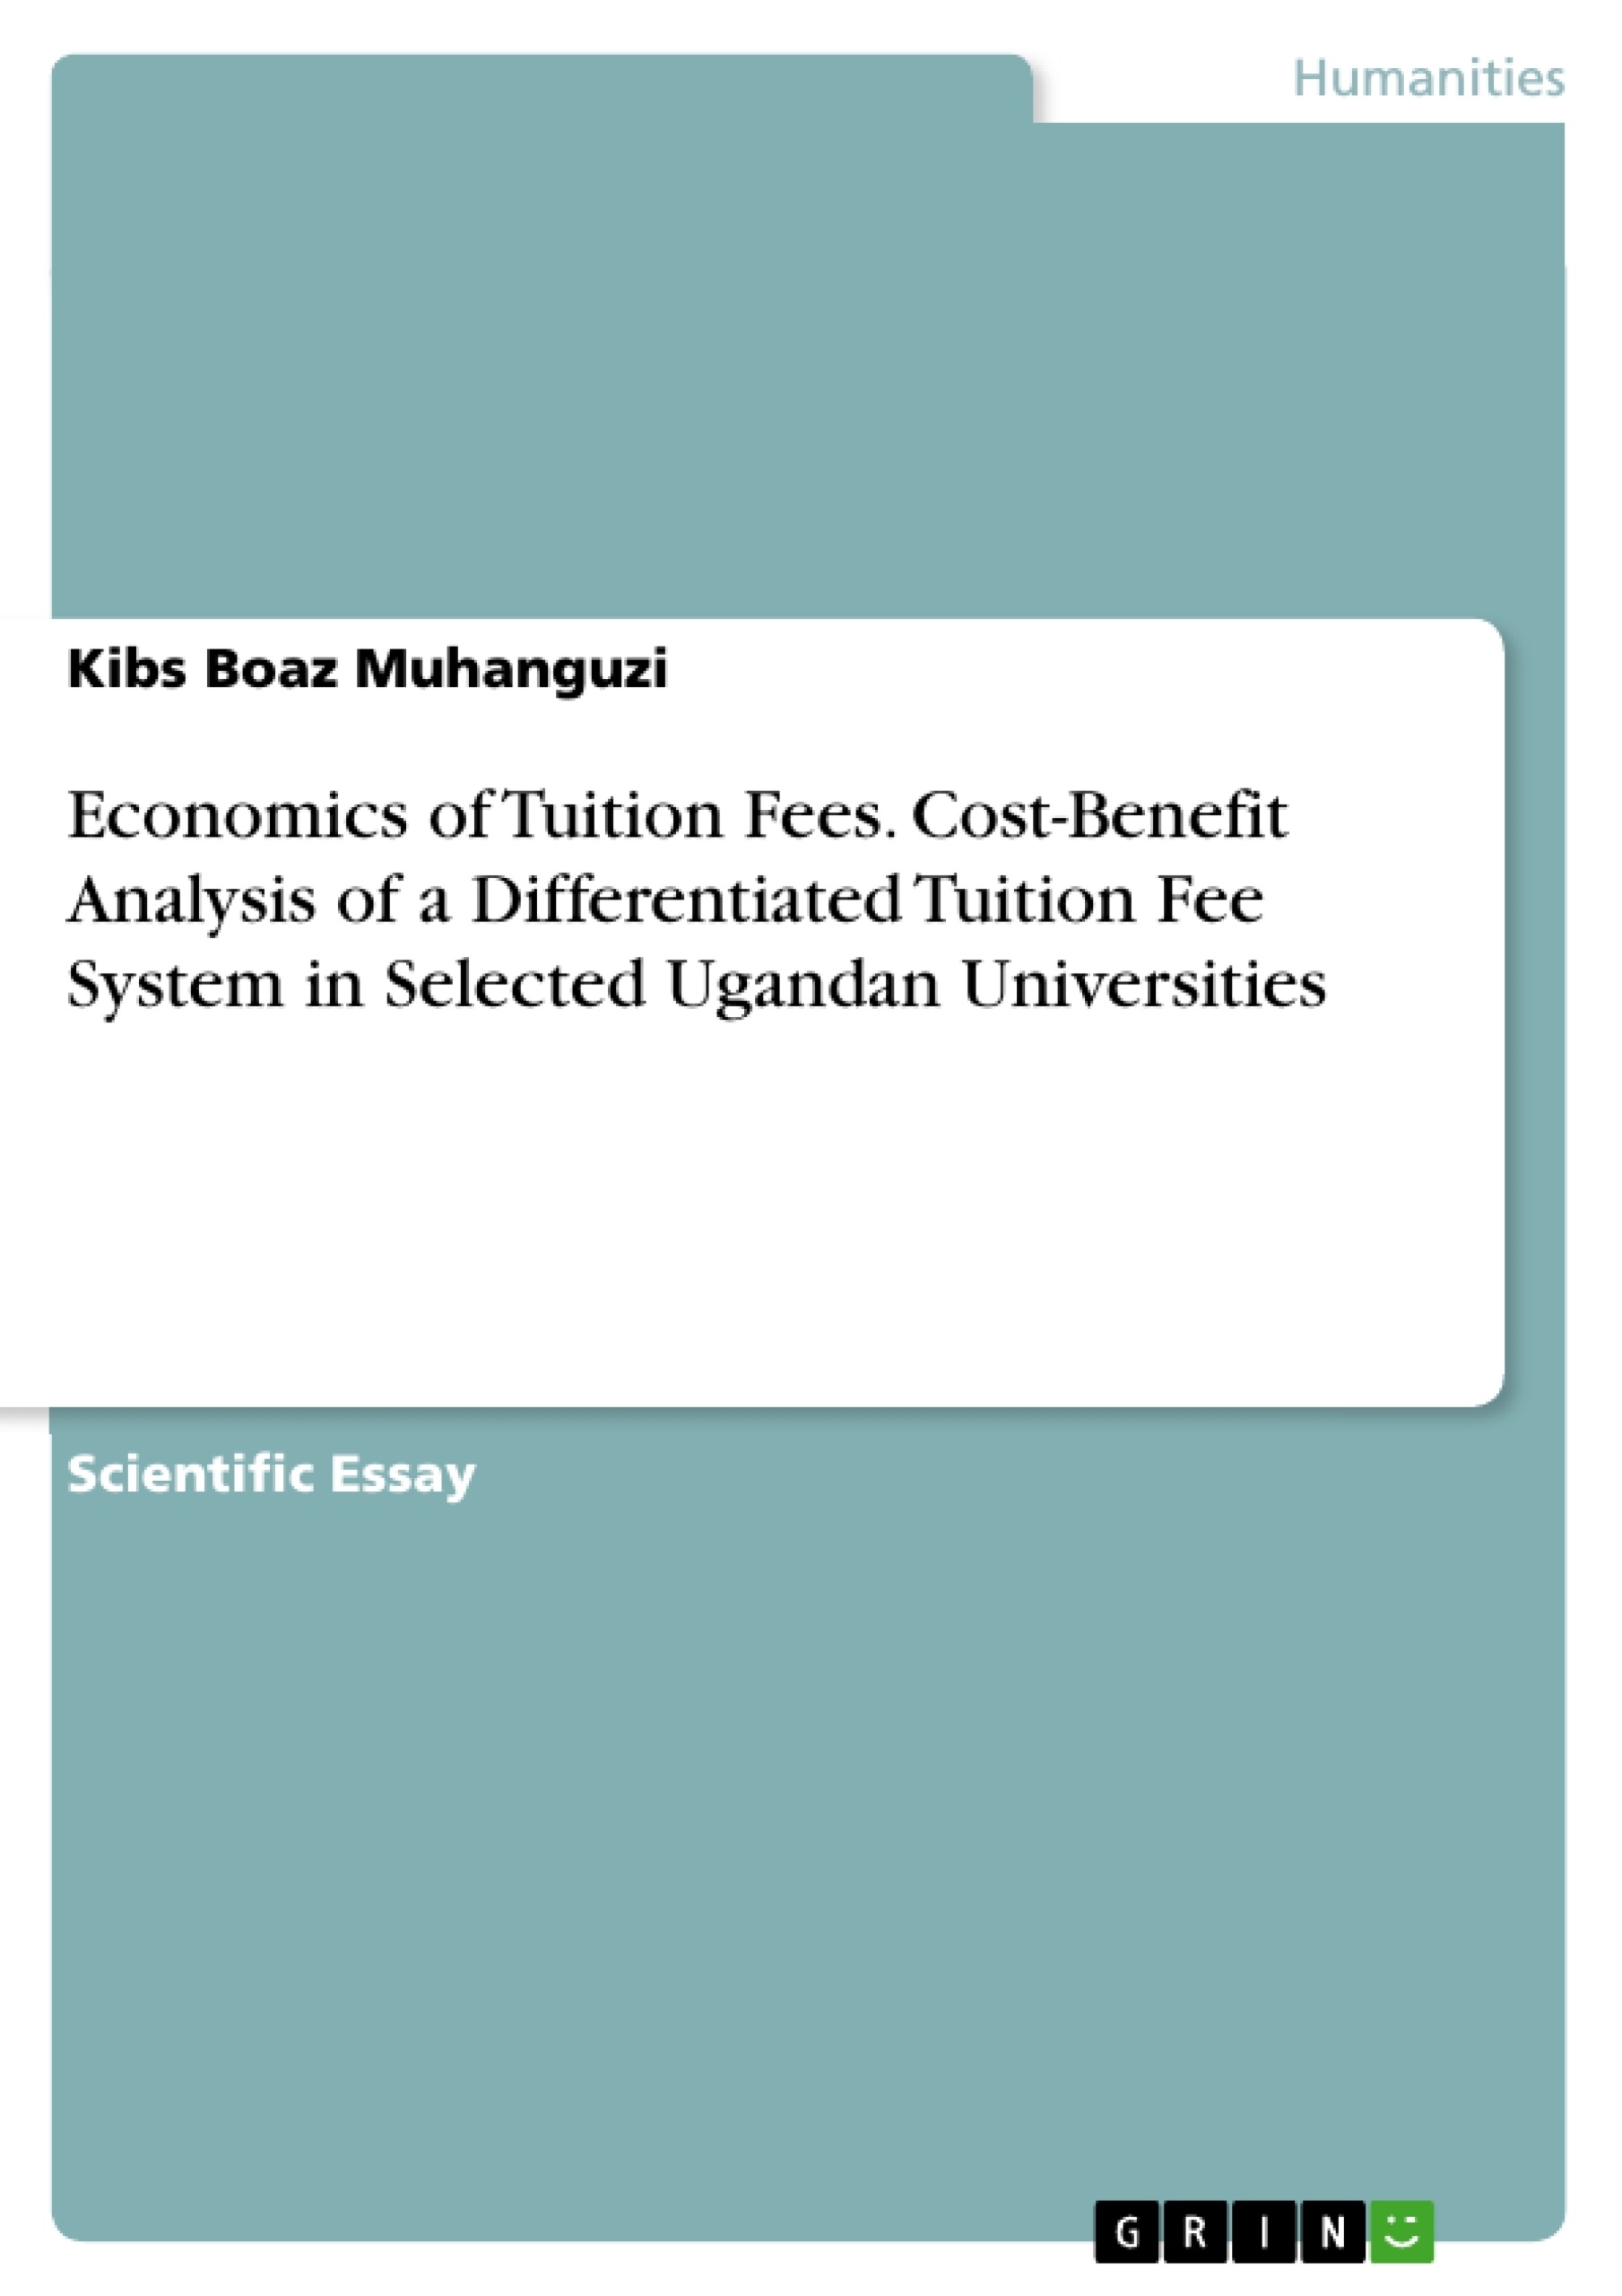 Titel: Economics of Tuition Fees. Cost-Benefit Analysis of a Differentiated Tuition Fee System in Selected Ugandan Universities